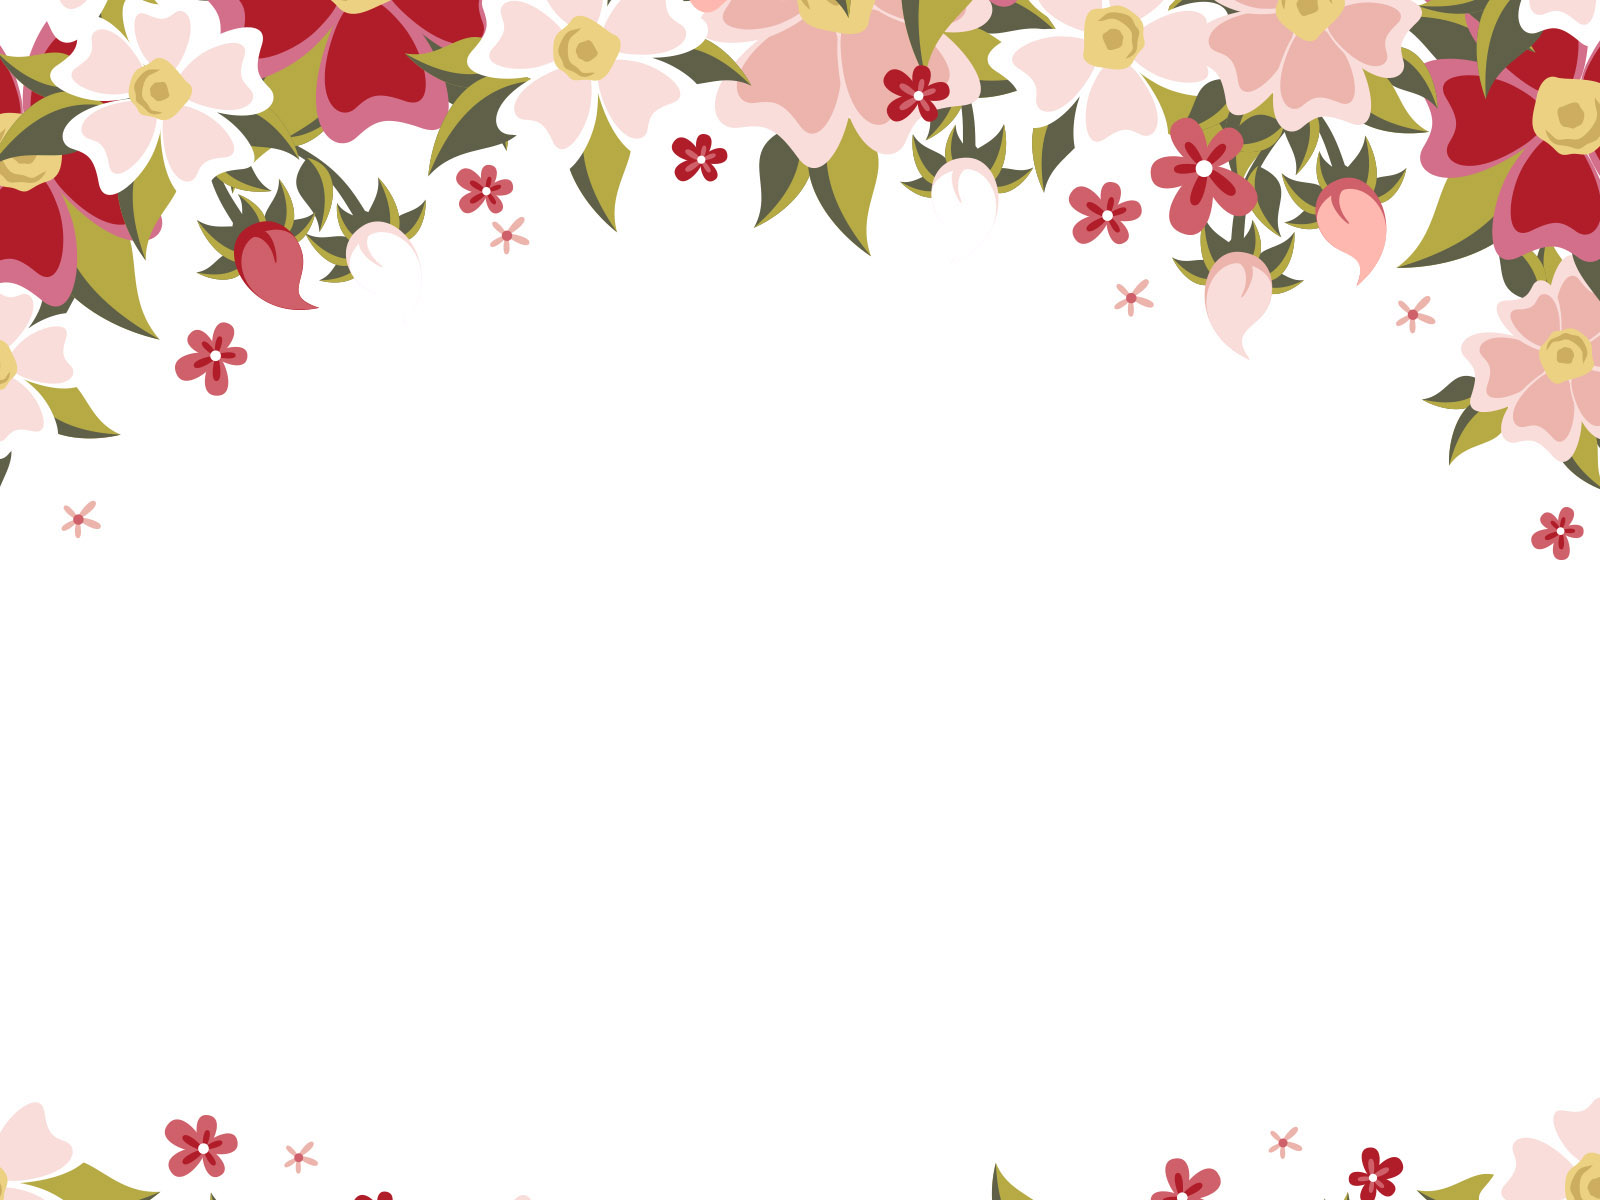 Floral Design Backgrounds | Flowers Templates | Free PPT Grounds